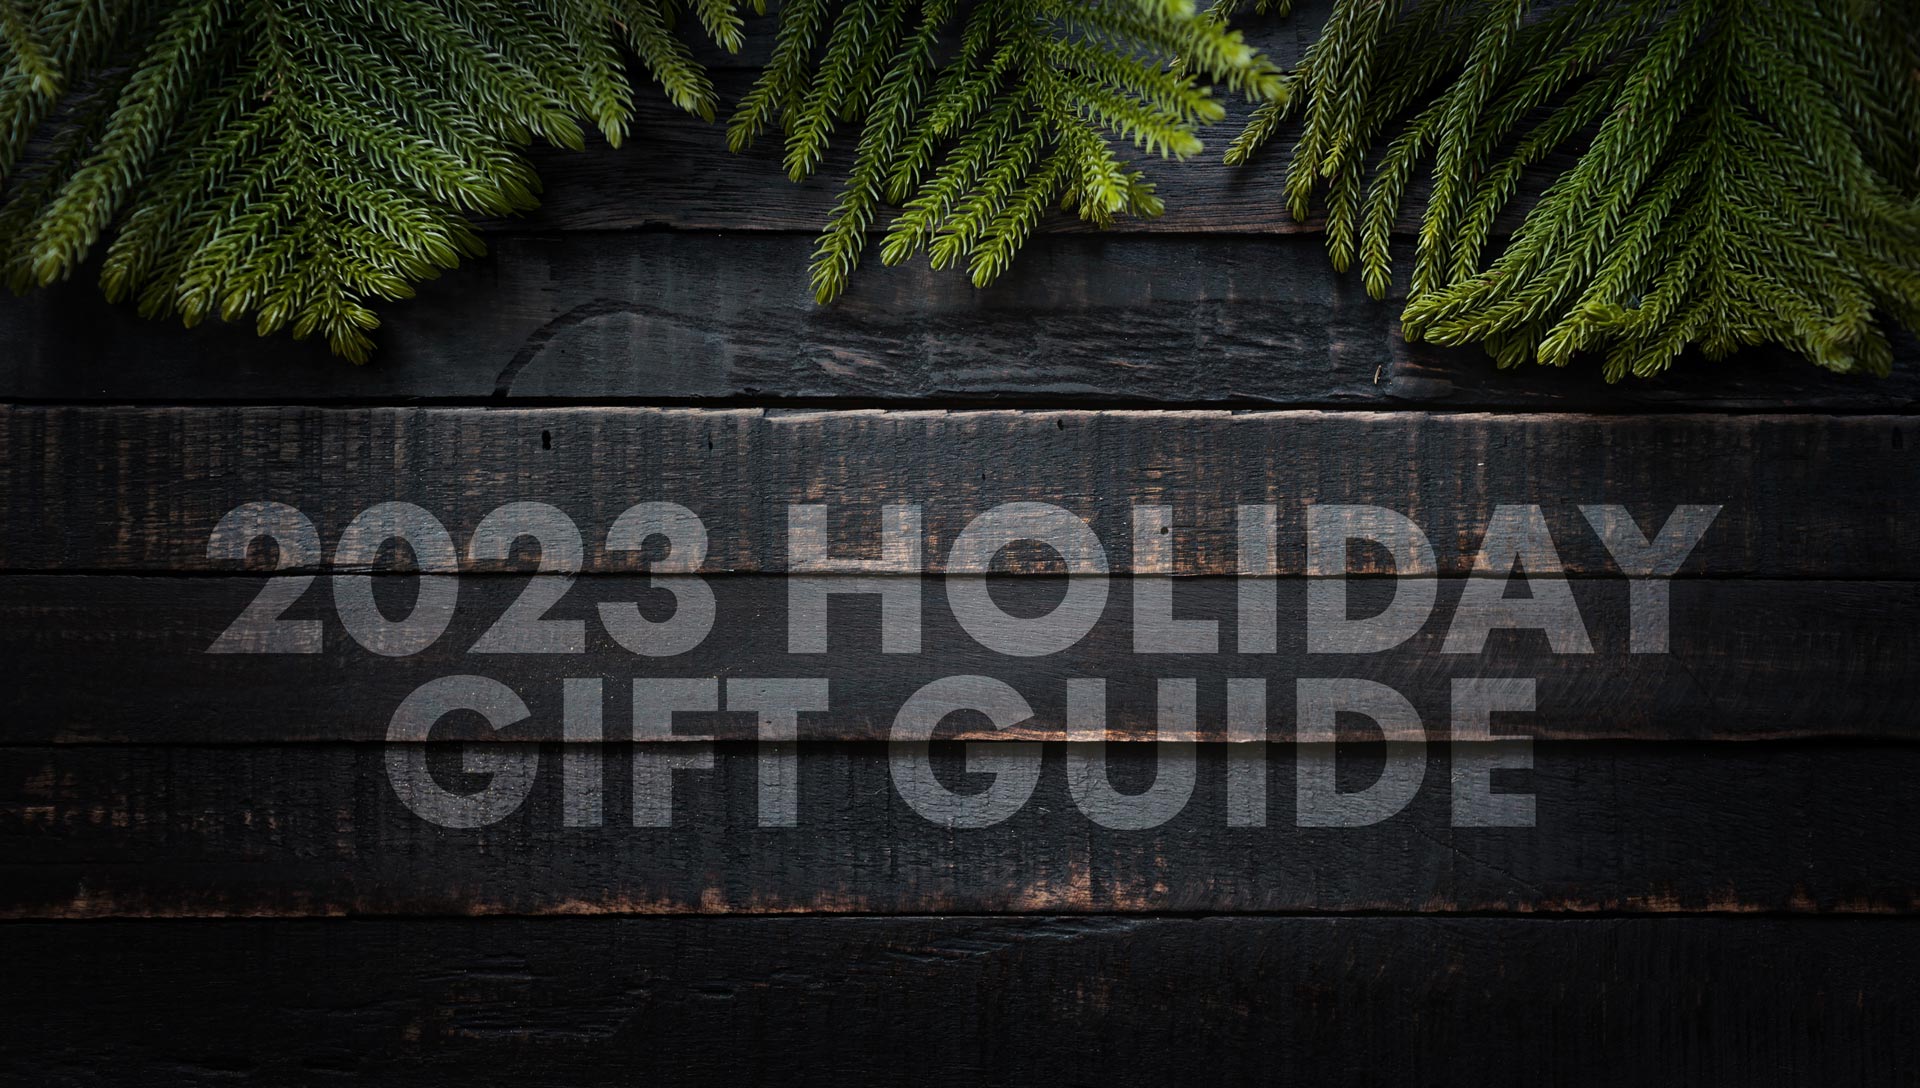 2023 Holiday Gift Guide